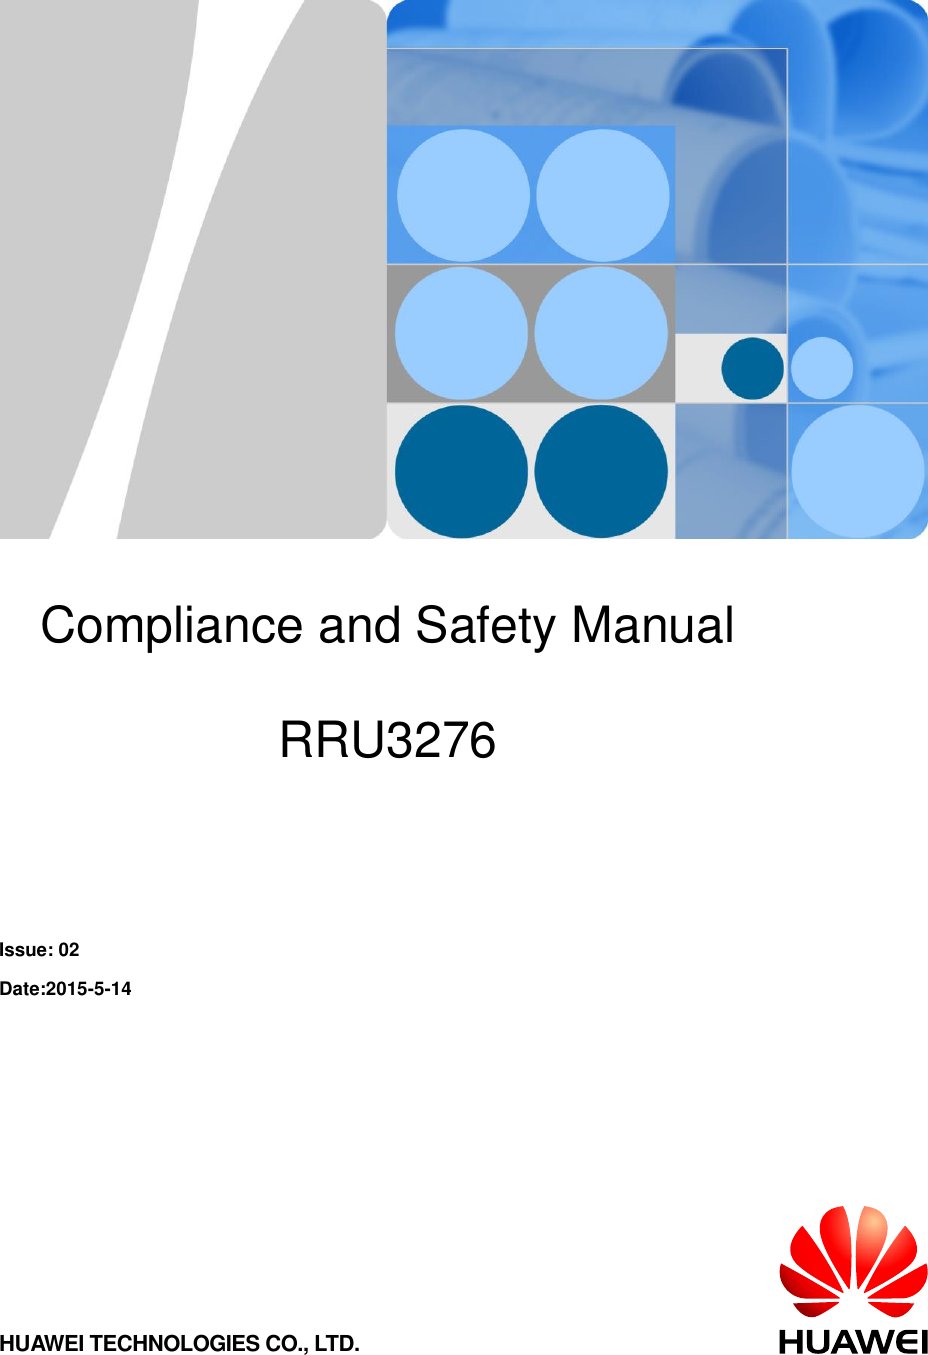            Compliance and Safety Manual  RRU3276     Issue: 02  Date:2015-5-14  HUAWEI TECHNOLOGIES CO., LTD. 